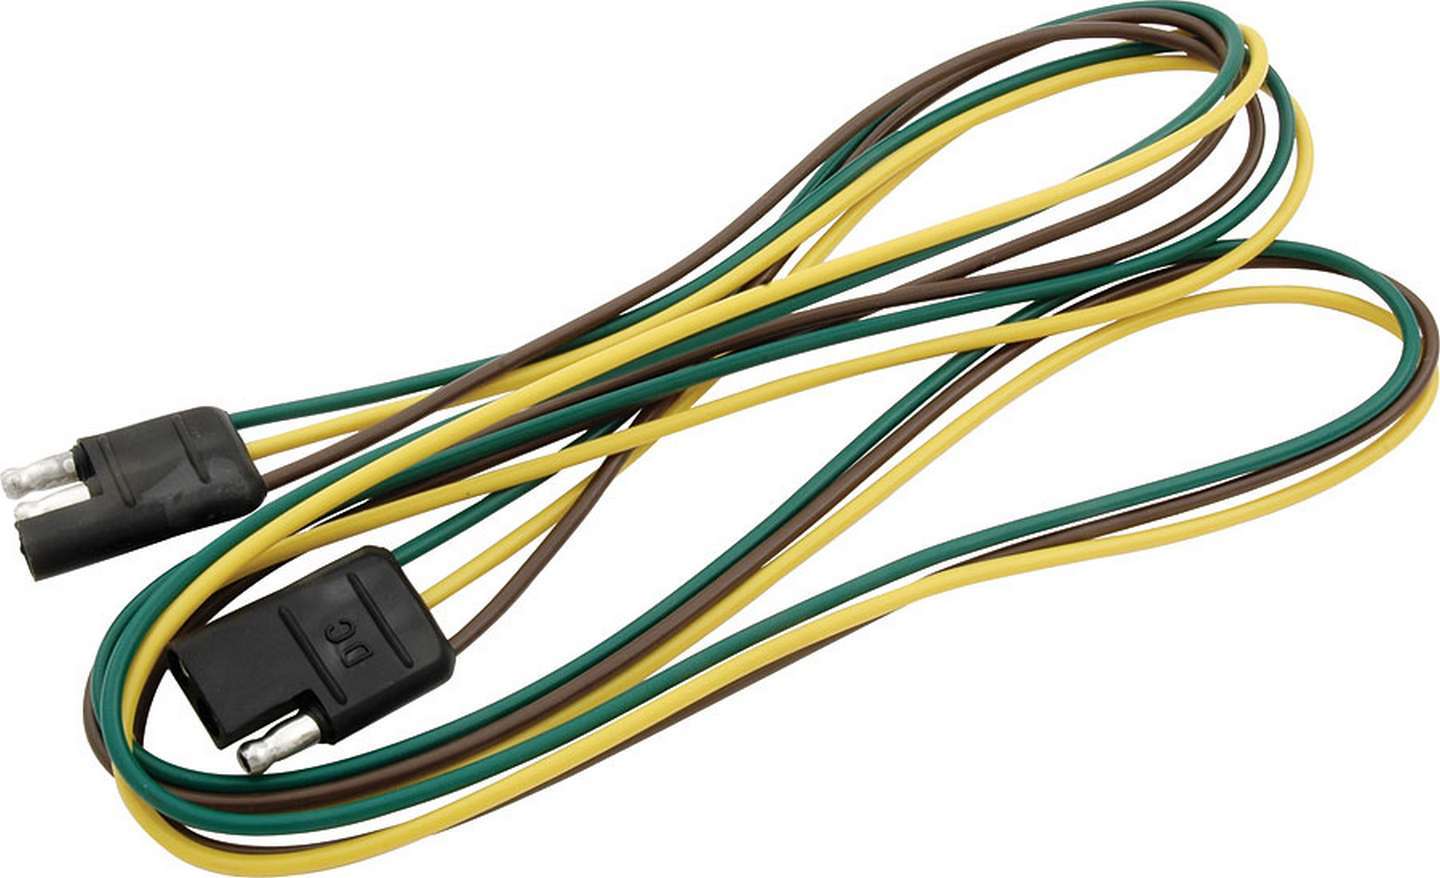 Universal Connector 3 Wire